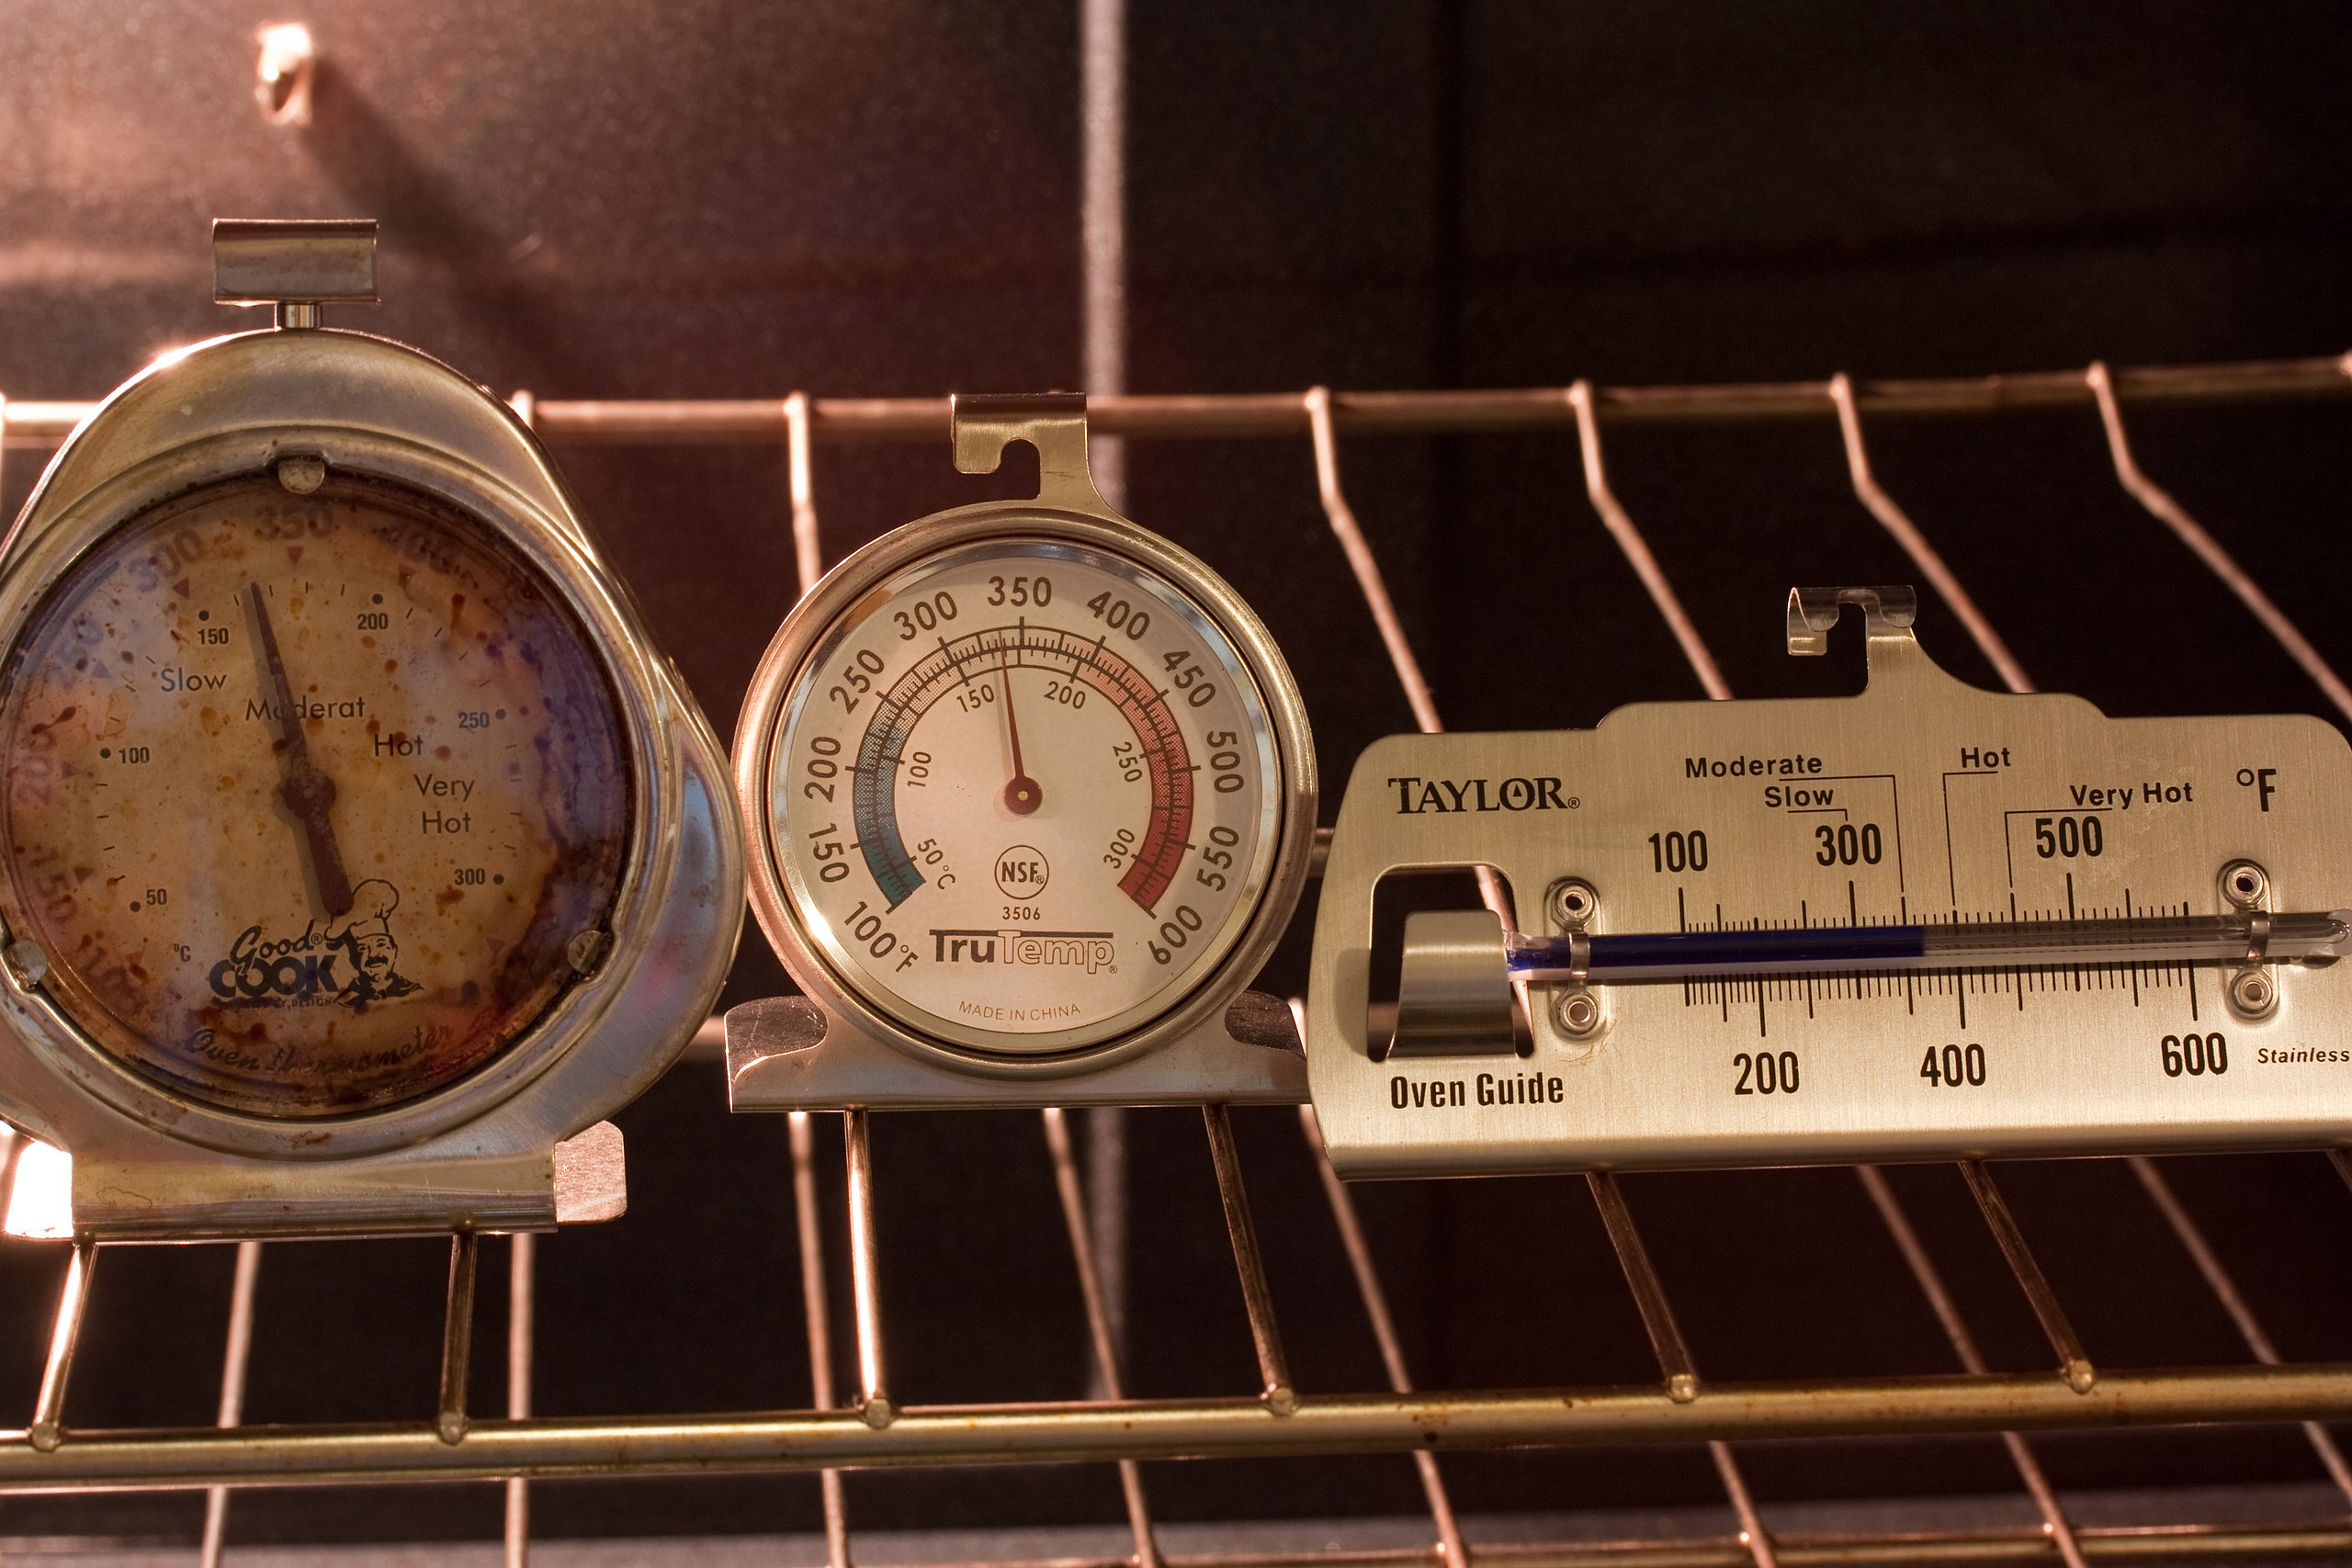 https://upload.wikimedia.org/wikipedia/commons/thumb/8/80/Oven_Thermometers_%284106971935%29.jpg/2560px-Oven_Thermometers_%284106971935%29.jpg